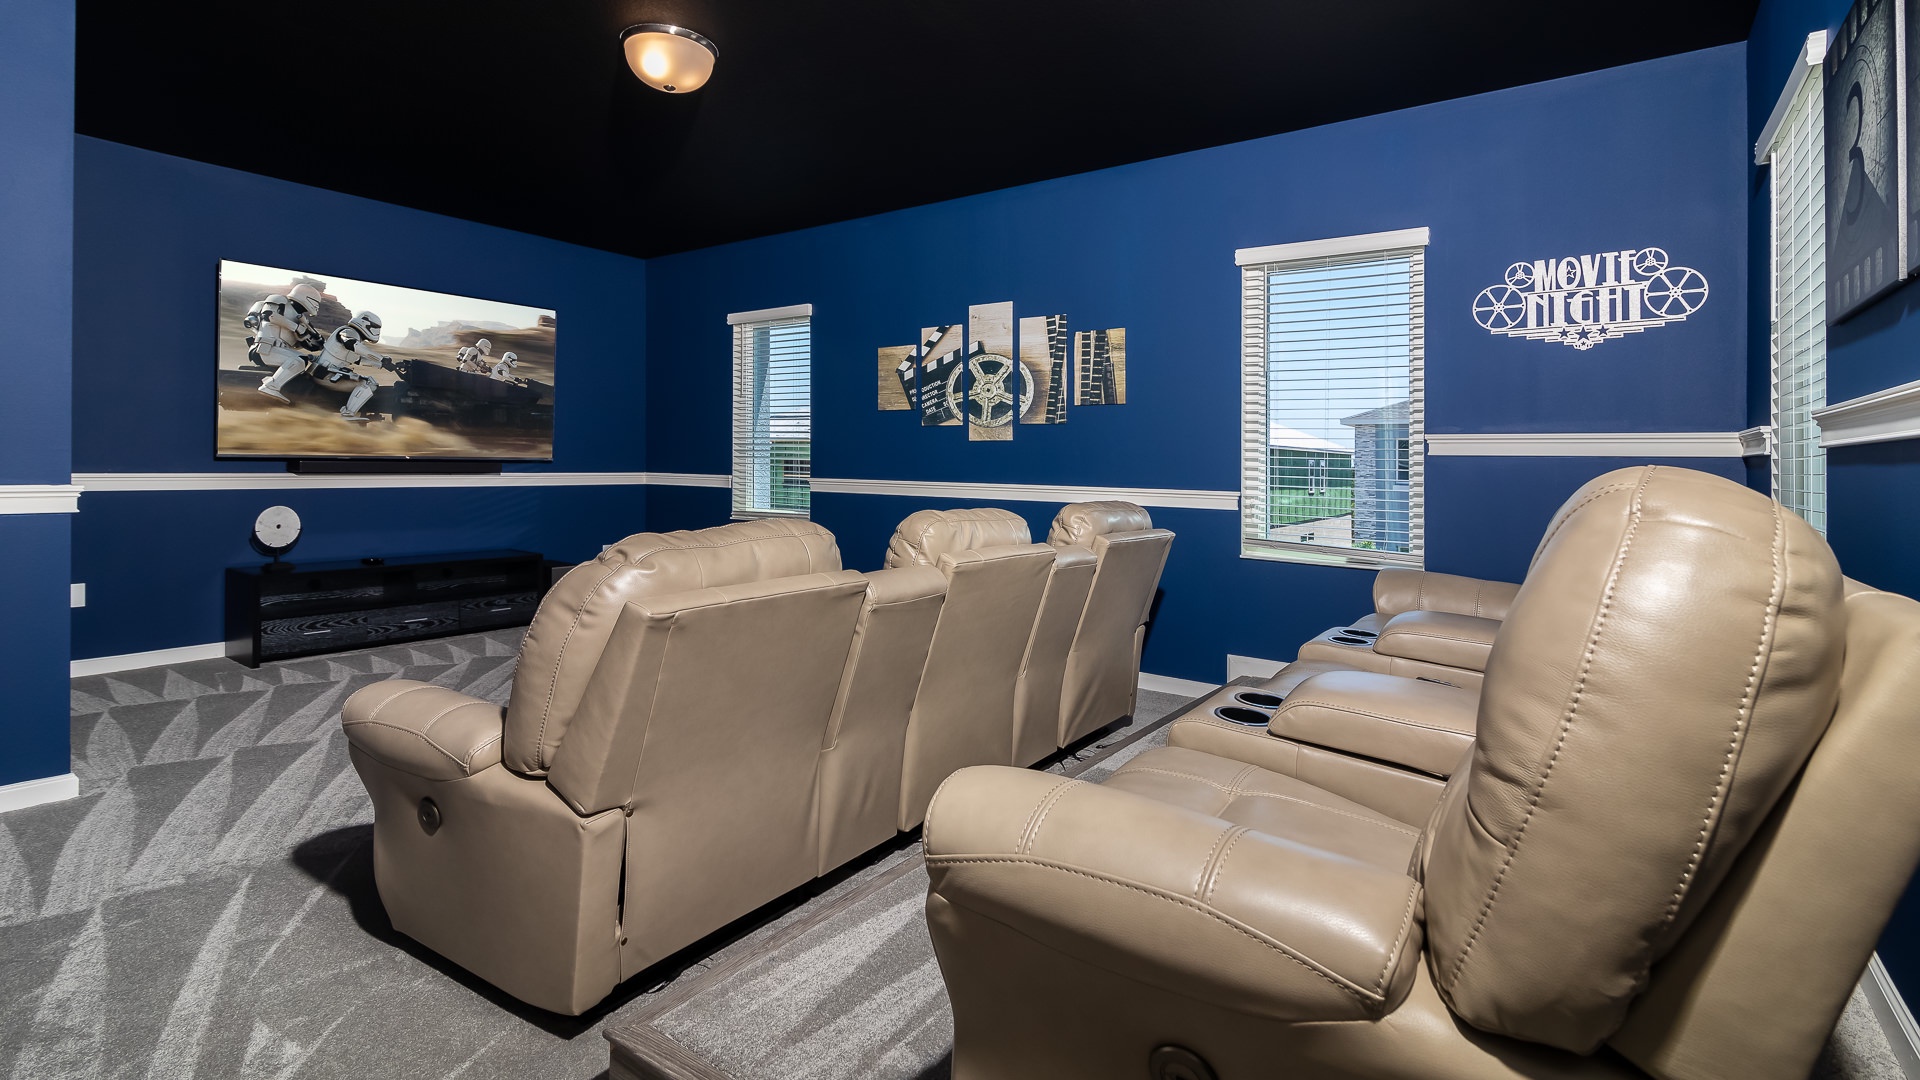 Watch your favorite movies in the in-home theater, complete with comfortable reclining chairs